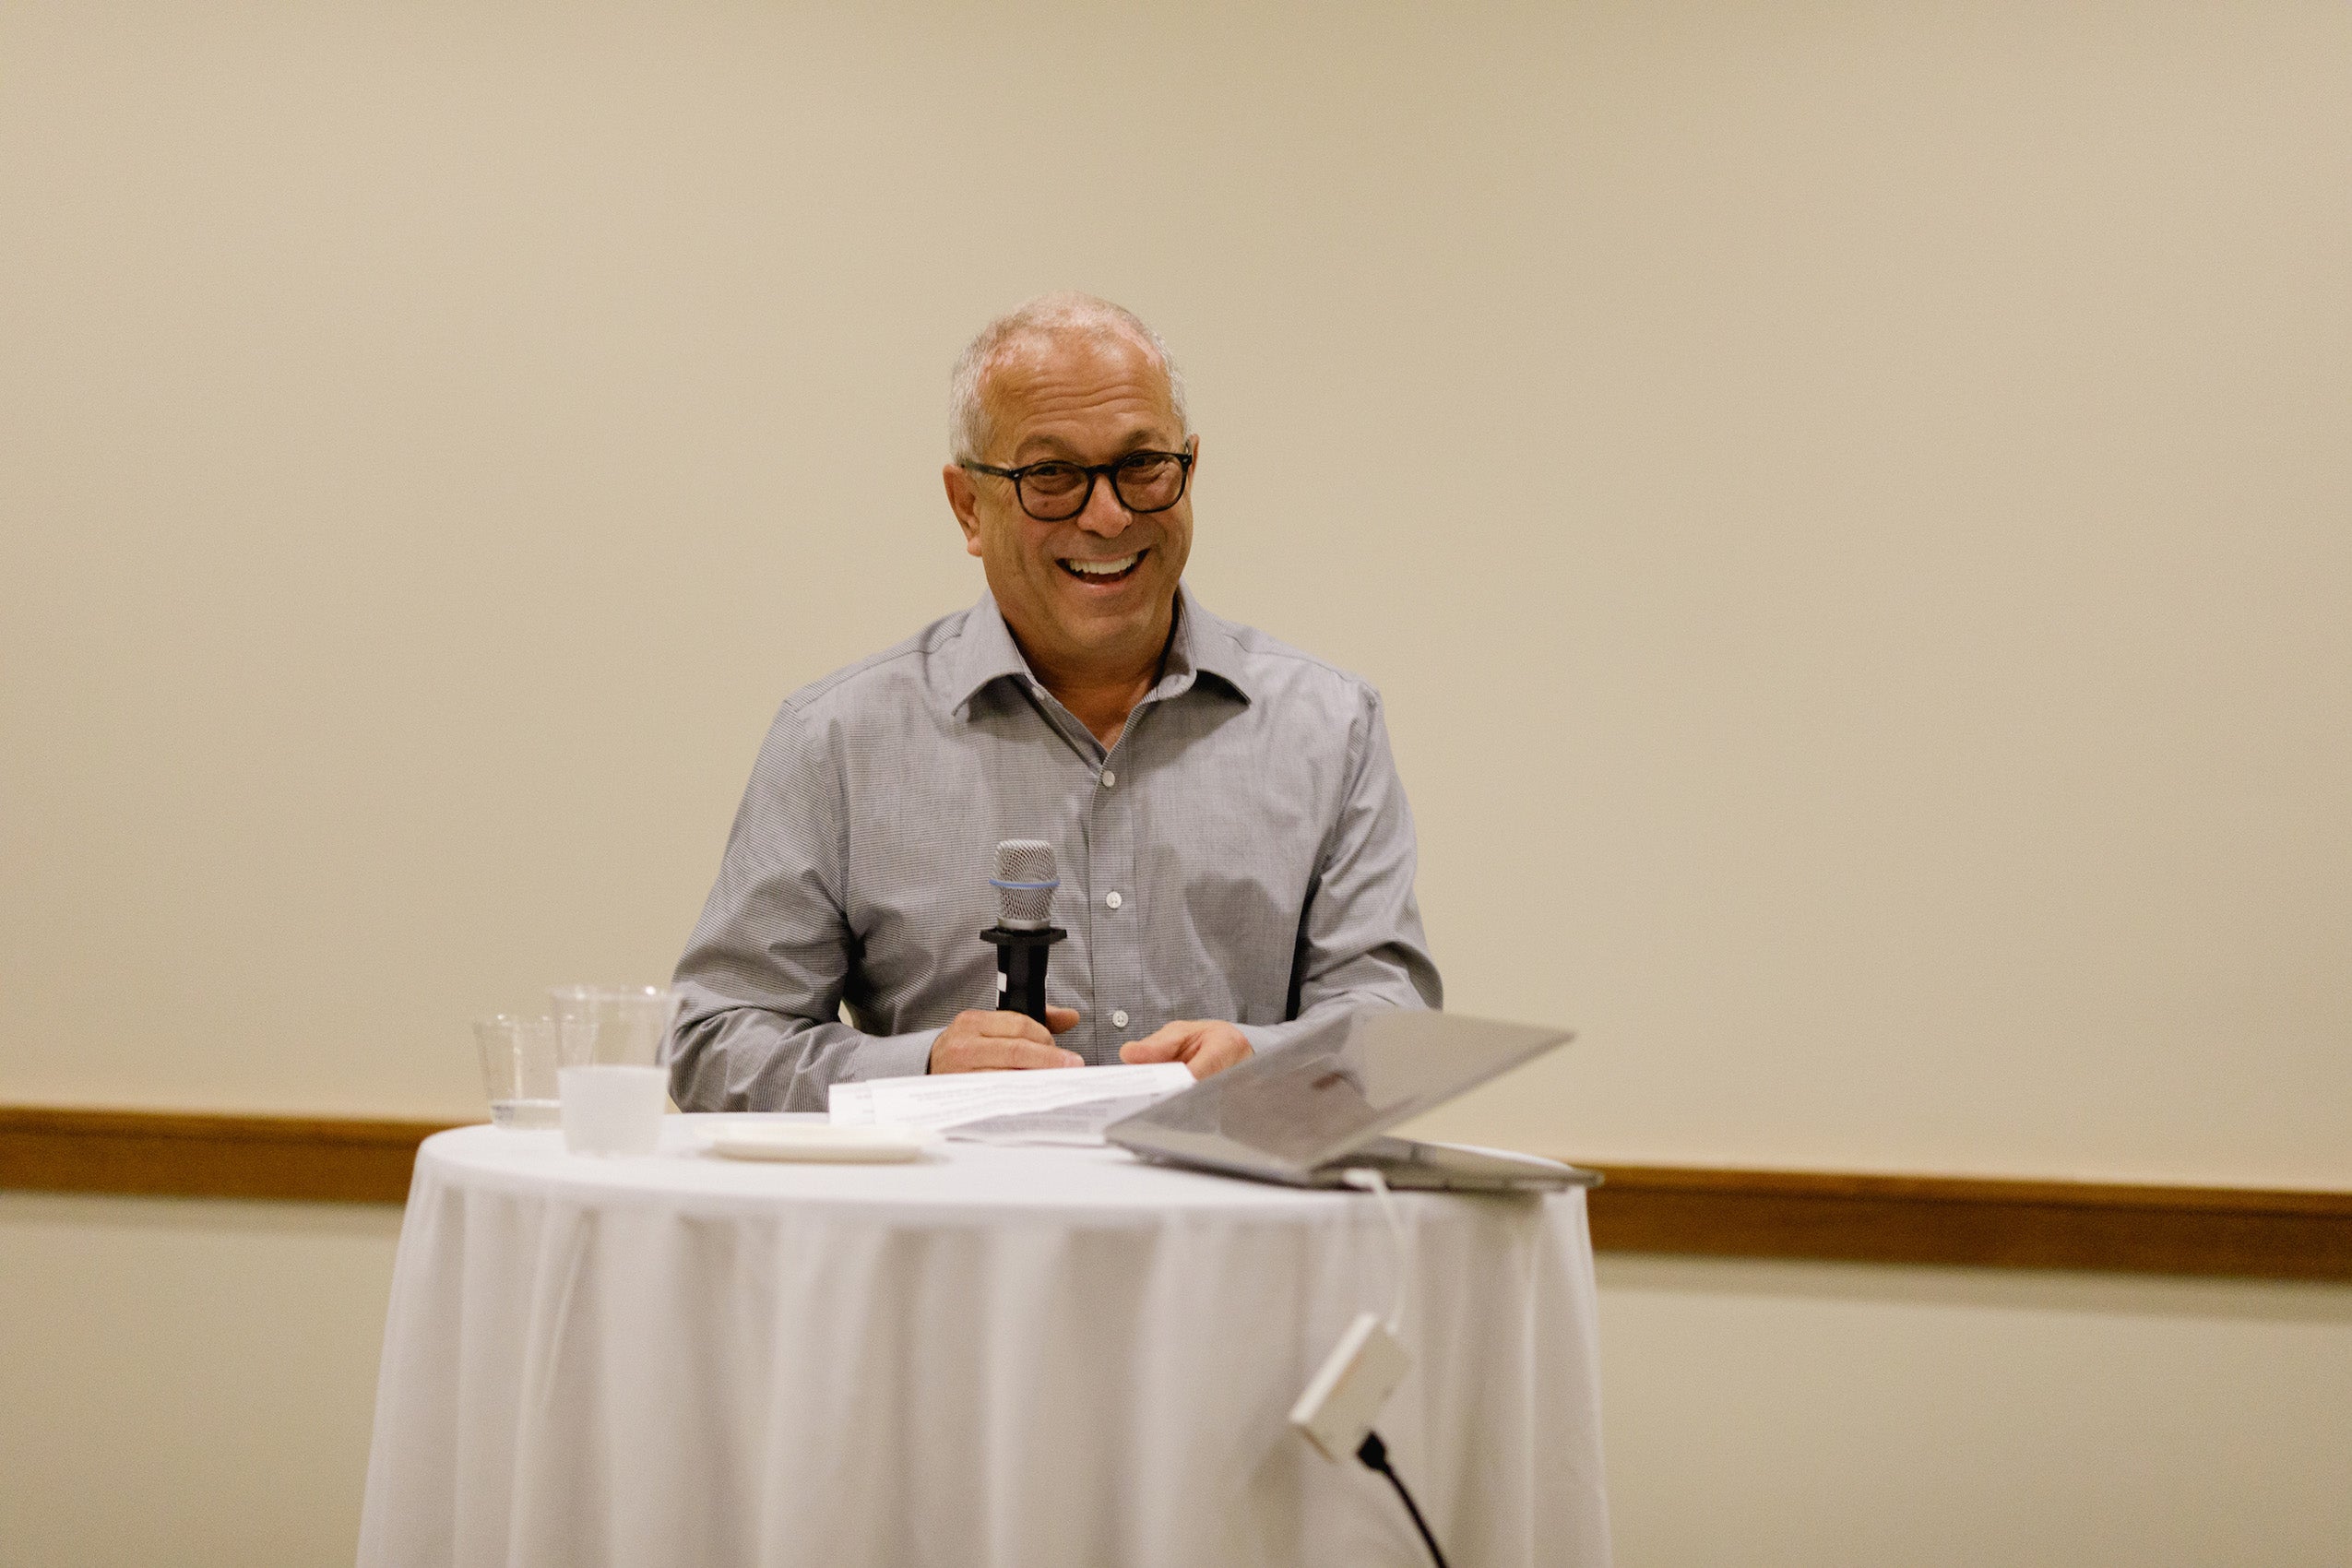 Man standing at a table holding a microphone